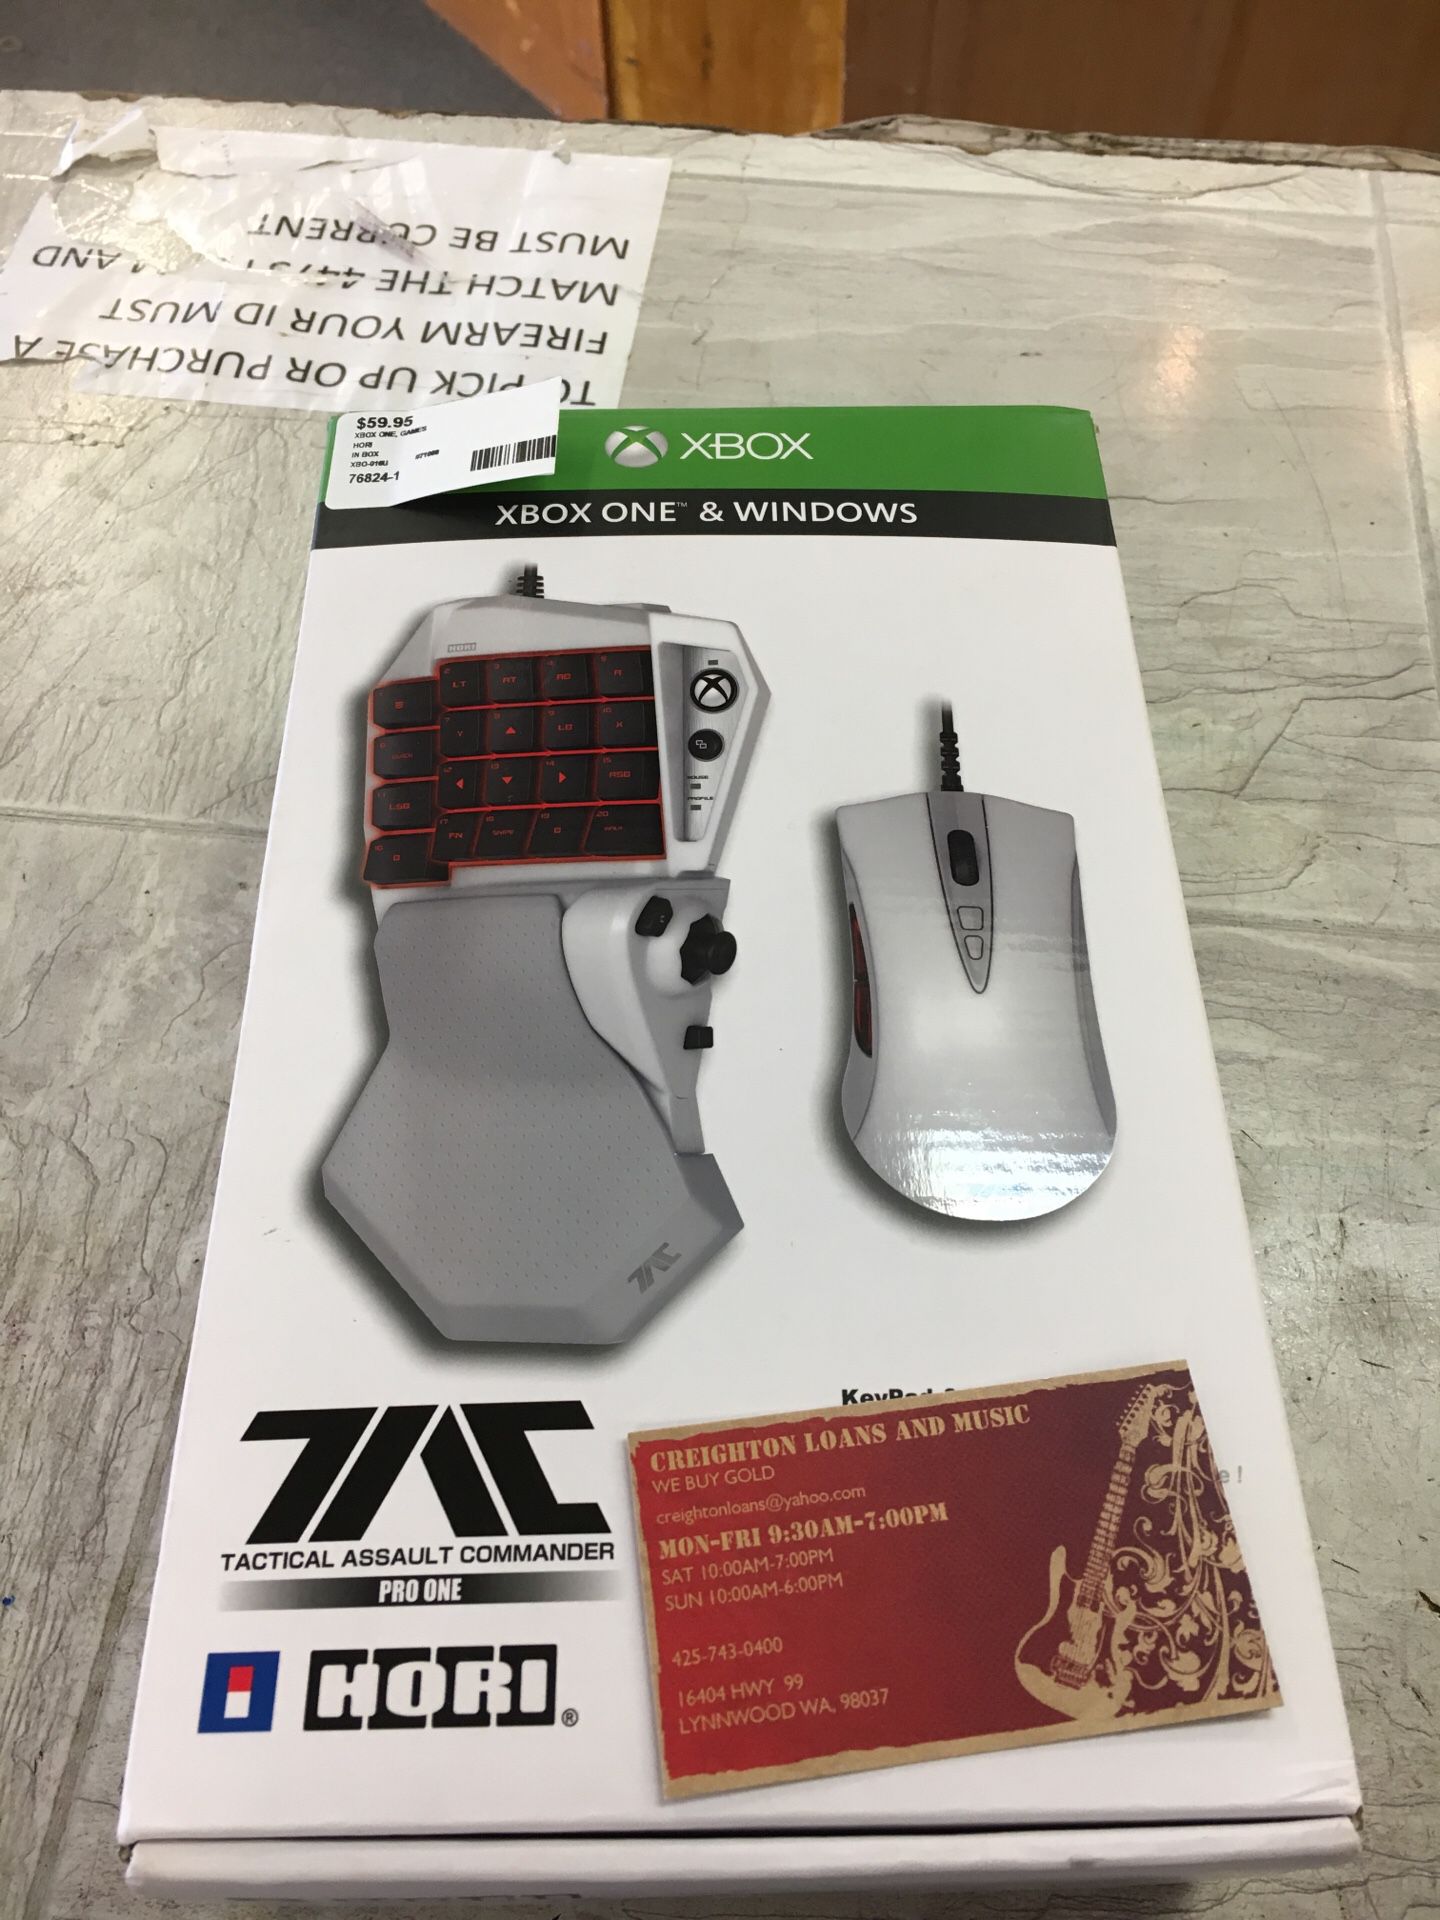 HORI Xbox One mouse and keyboard